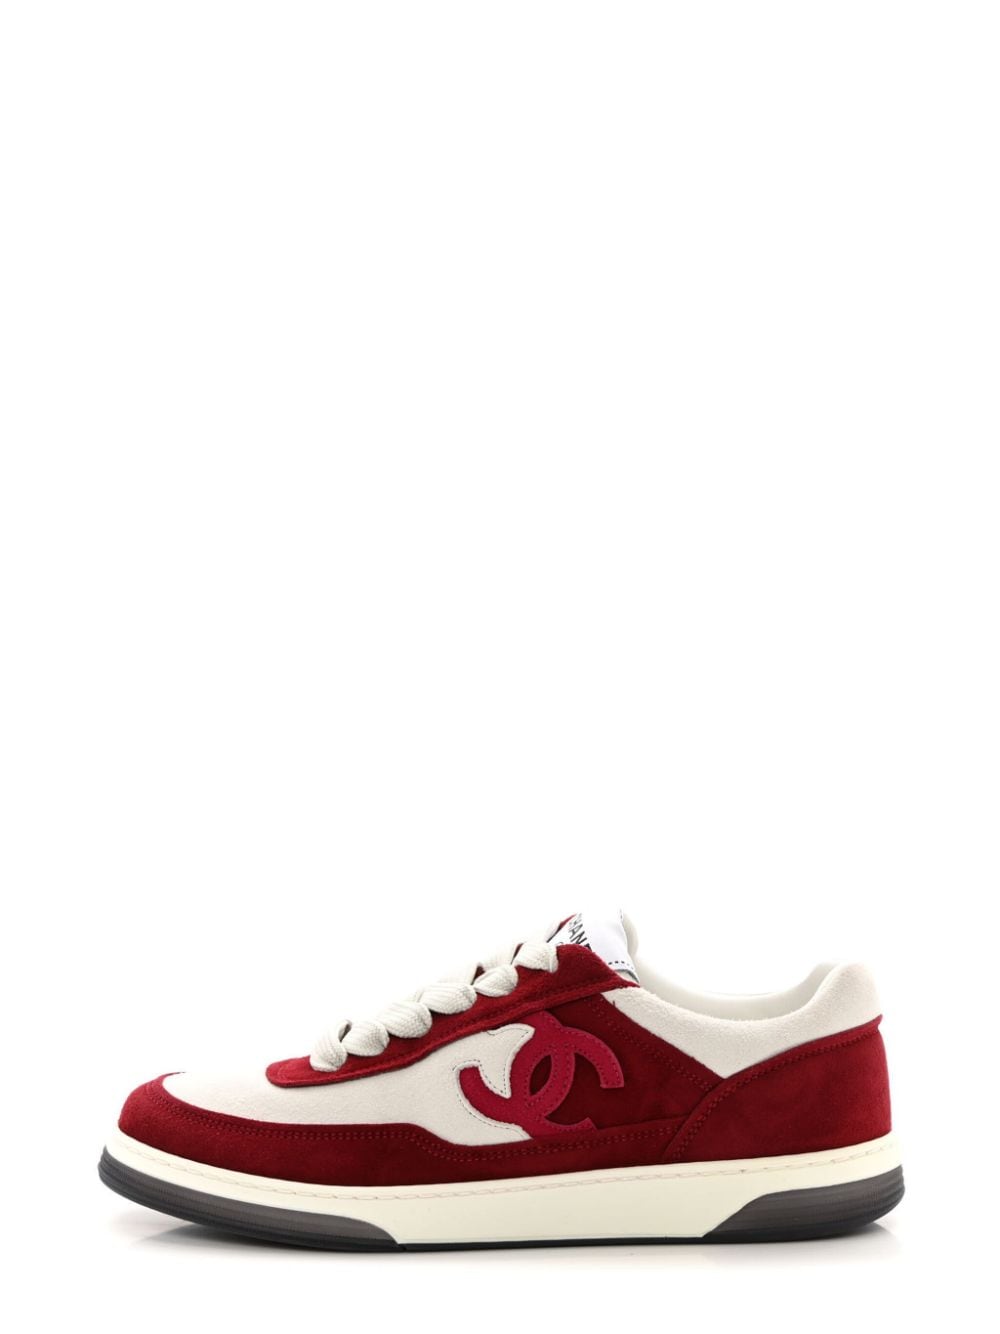 CHANEL Pre-Owned CC panelled suede sneakers - Red